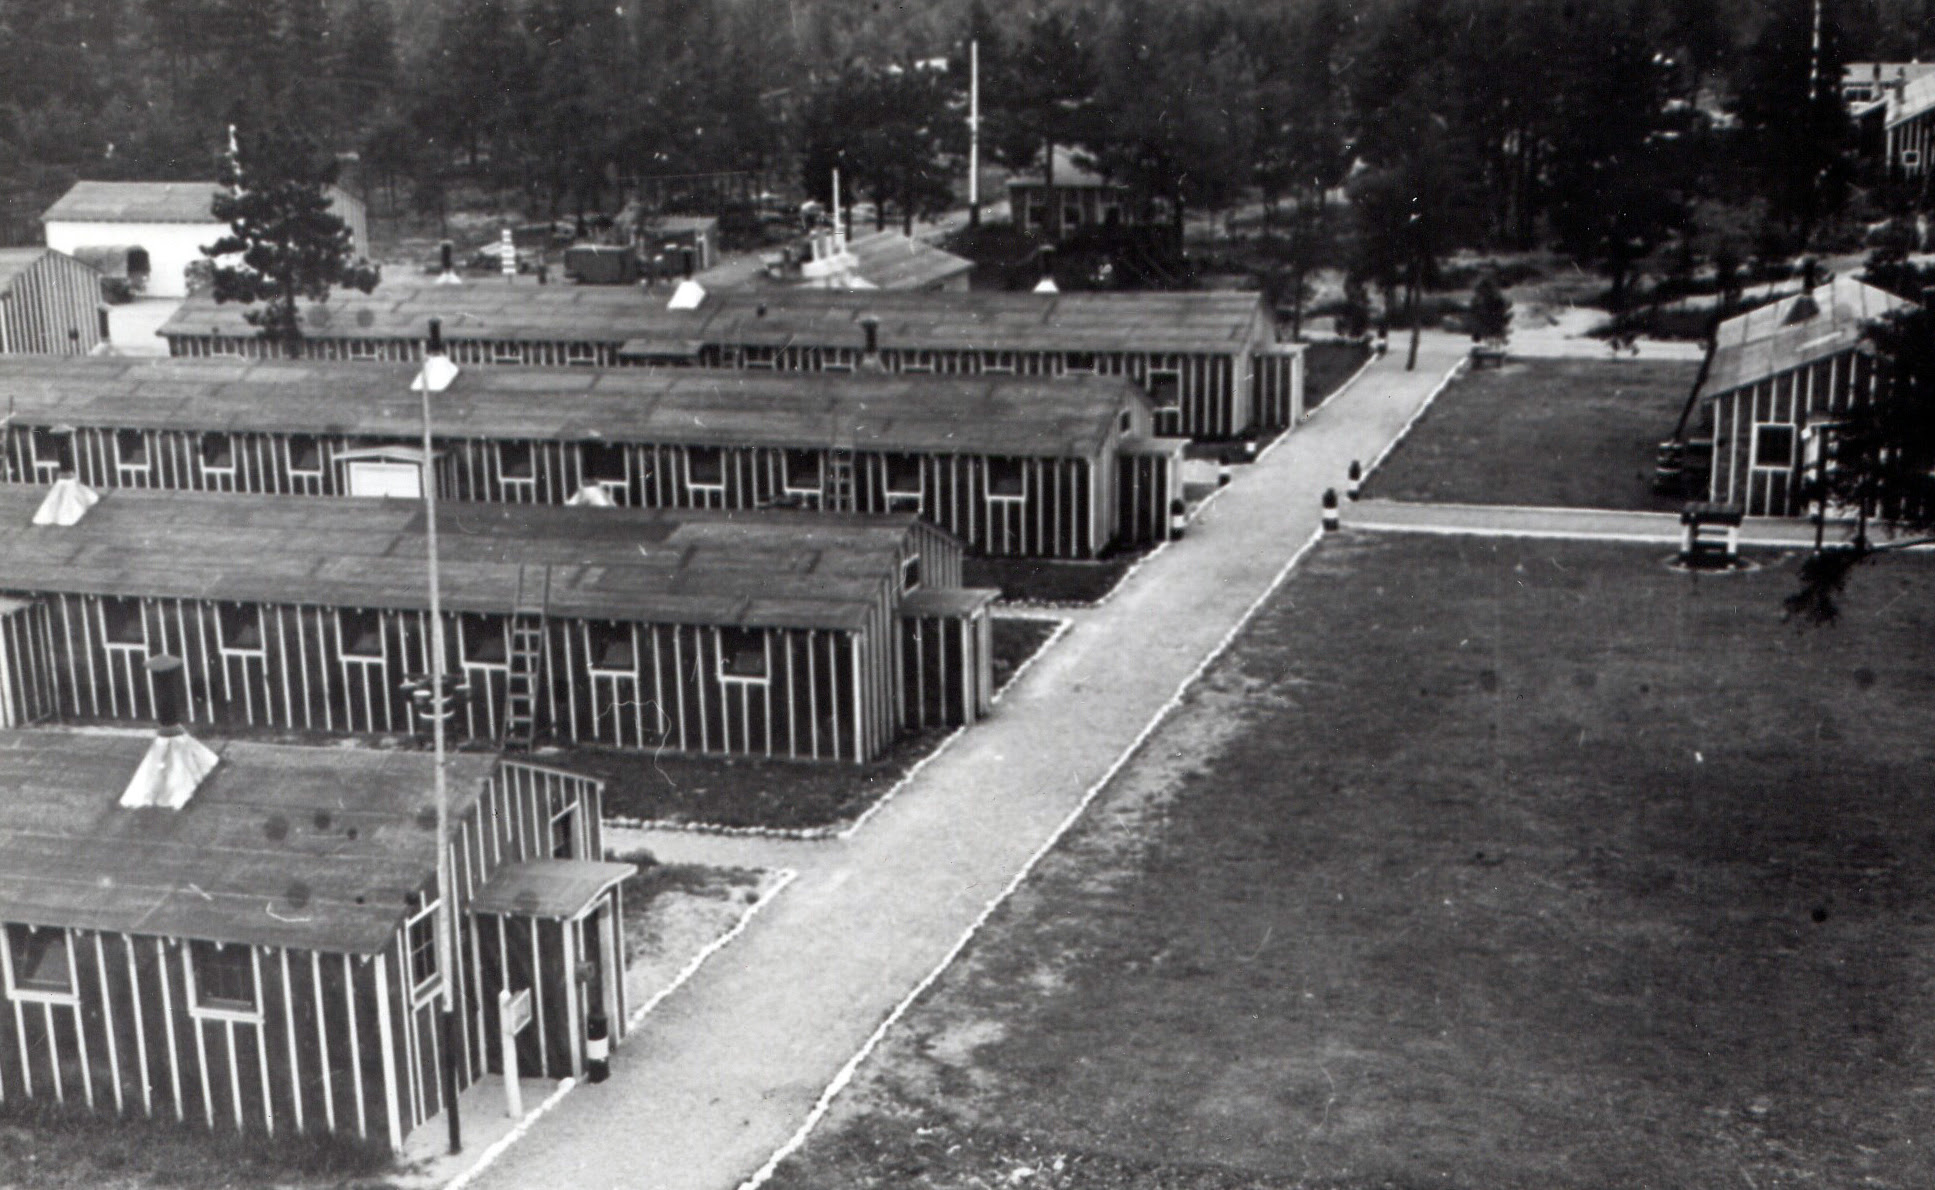 A view of Camp Raco in Chippewa County, the first Civilian Conservation Corps camp established in the Upper Peninsula.